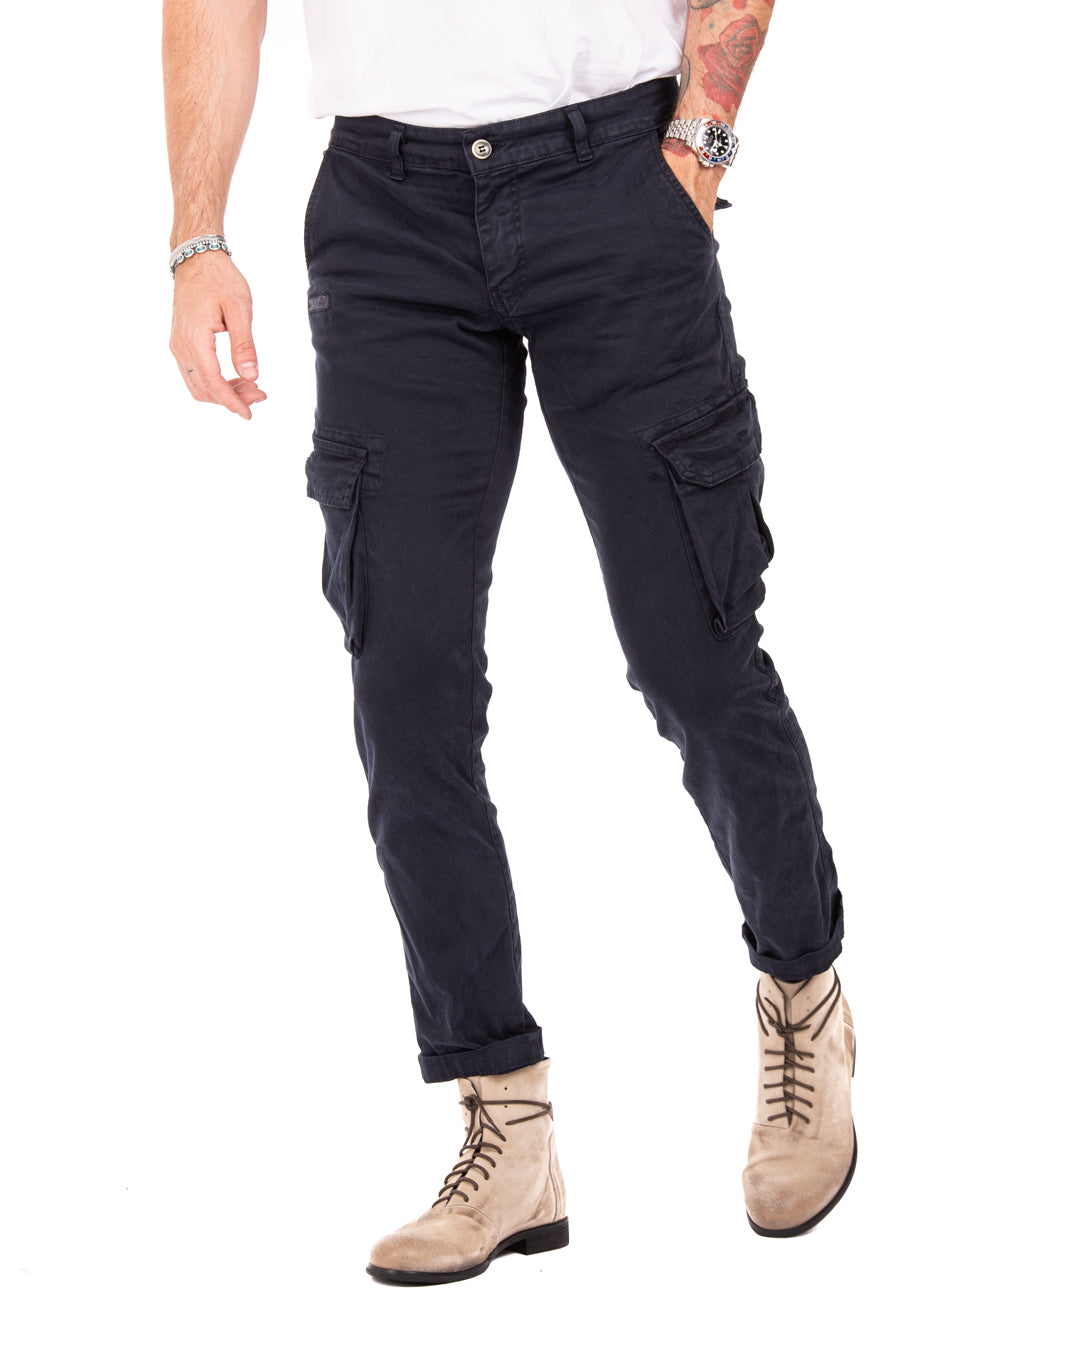 Roy - blue cargo trousers